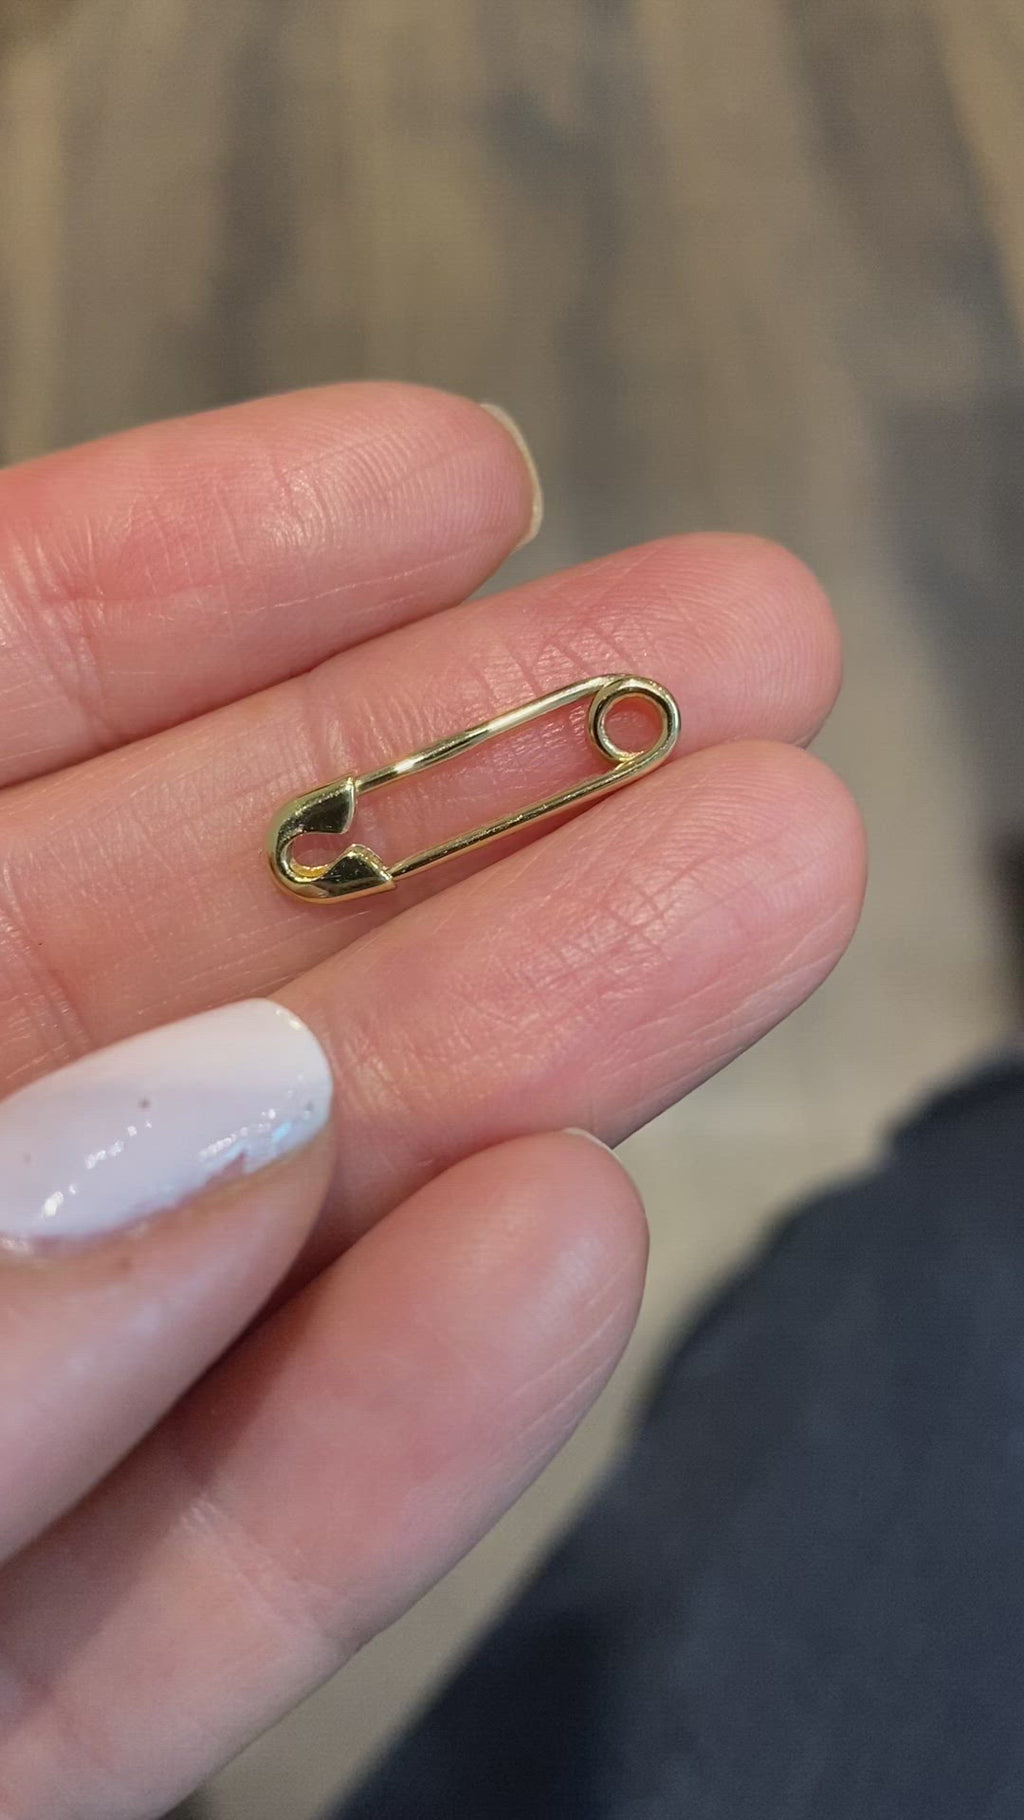 14k Gold Safety Pin Earring